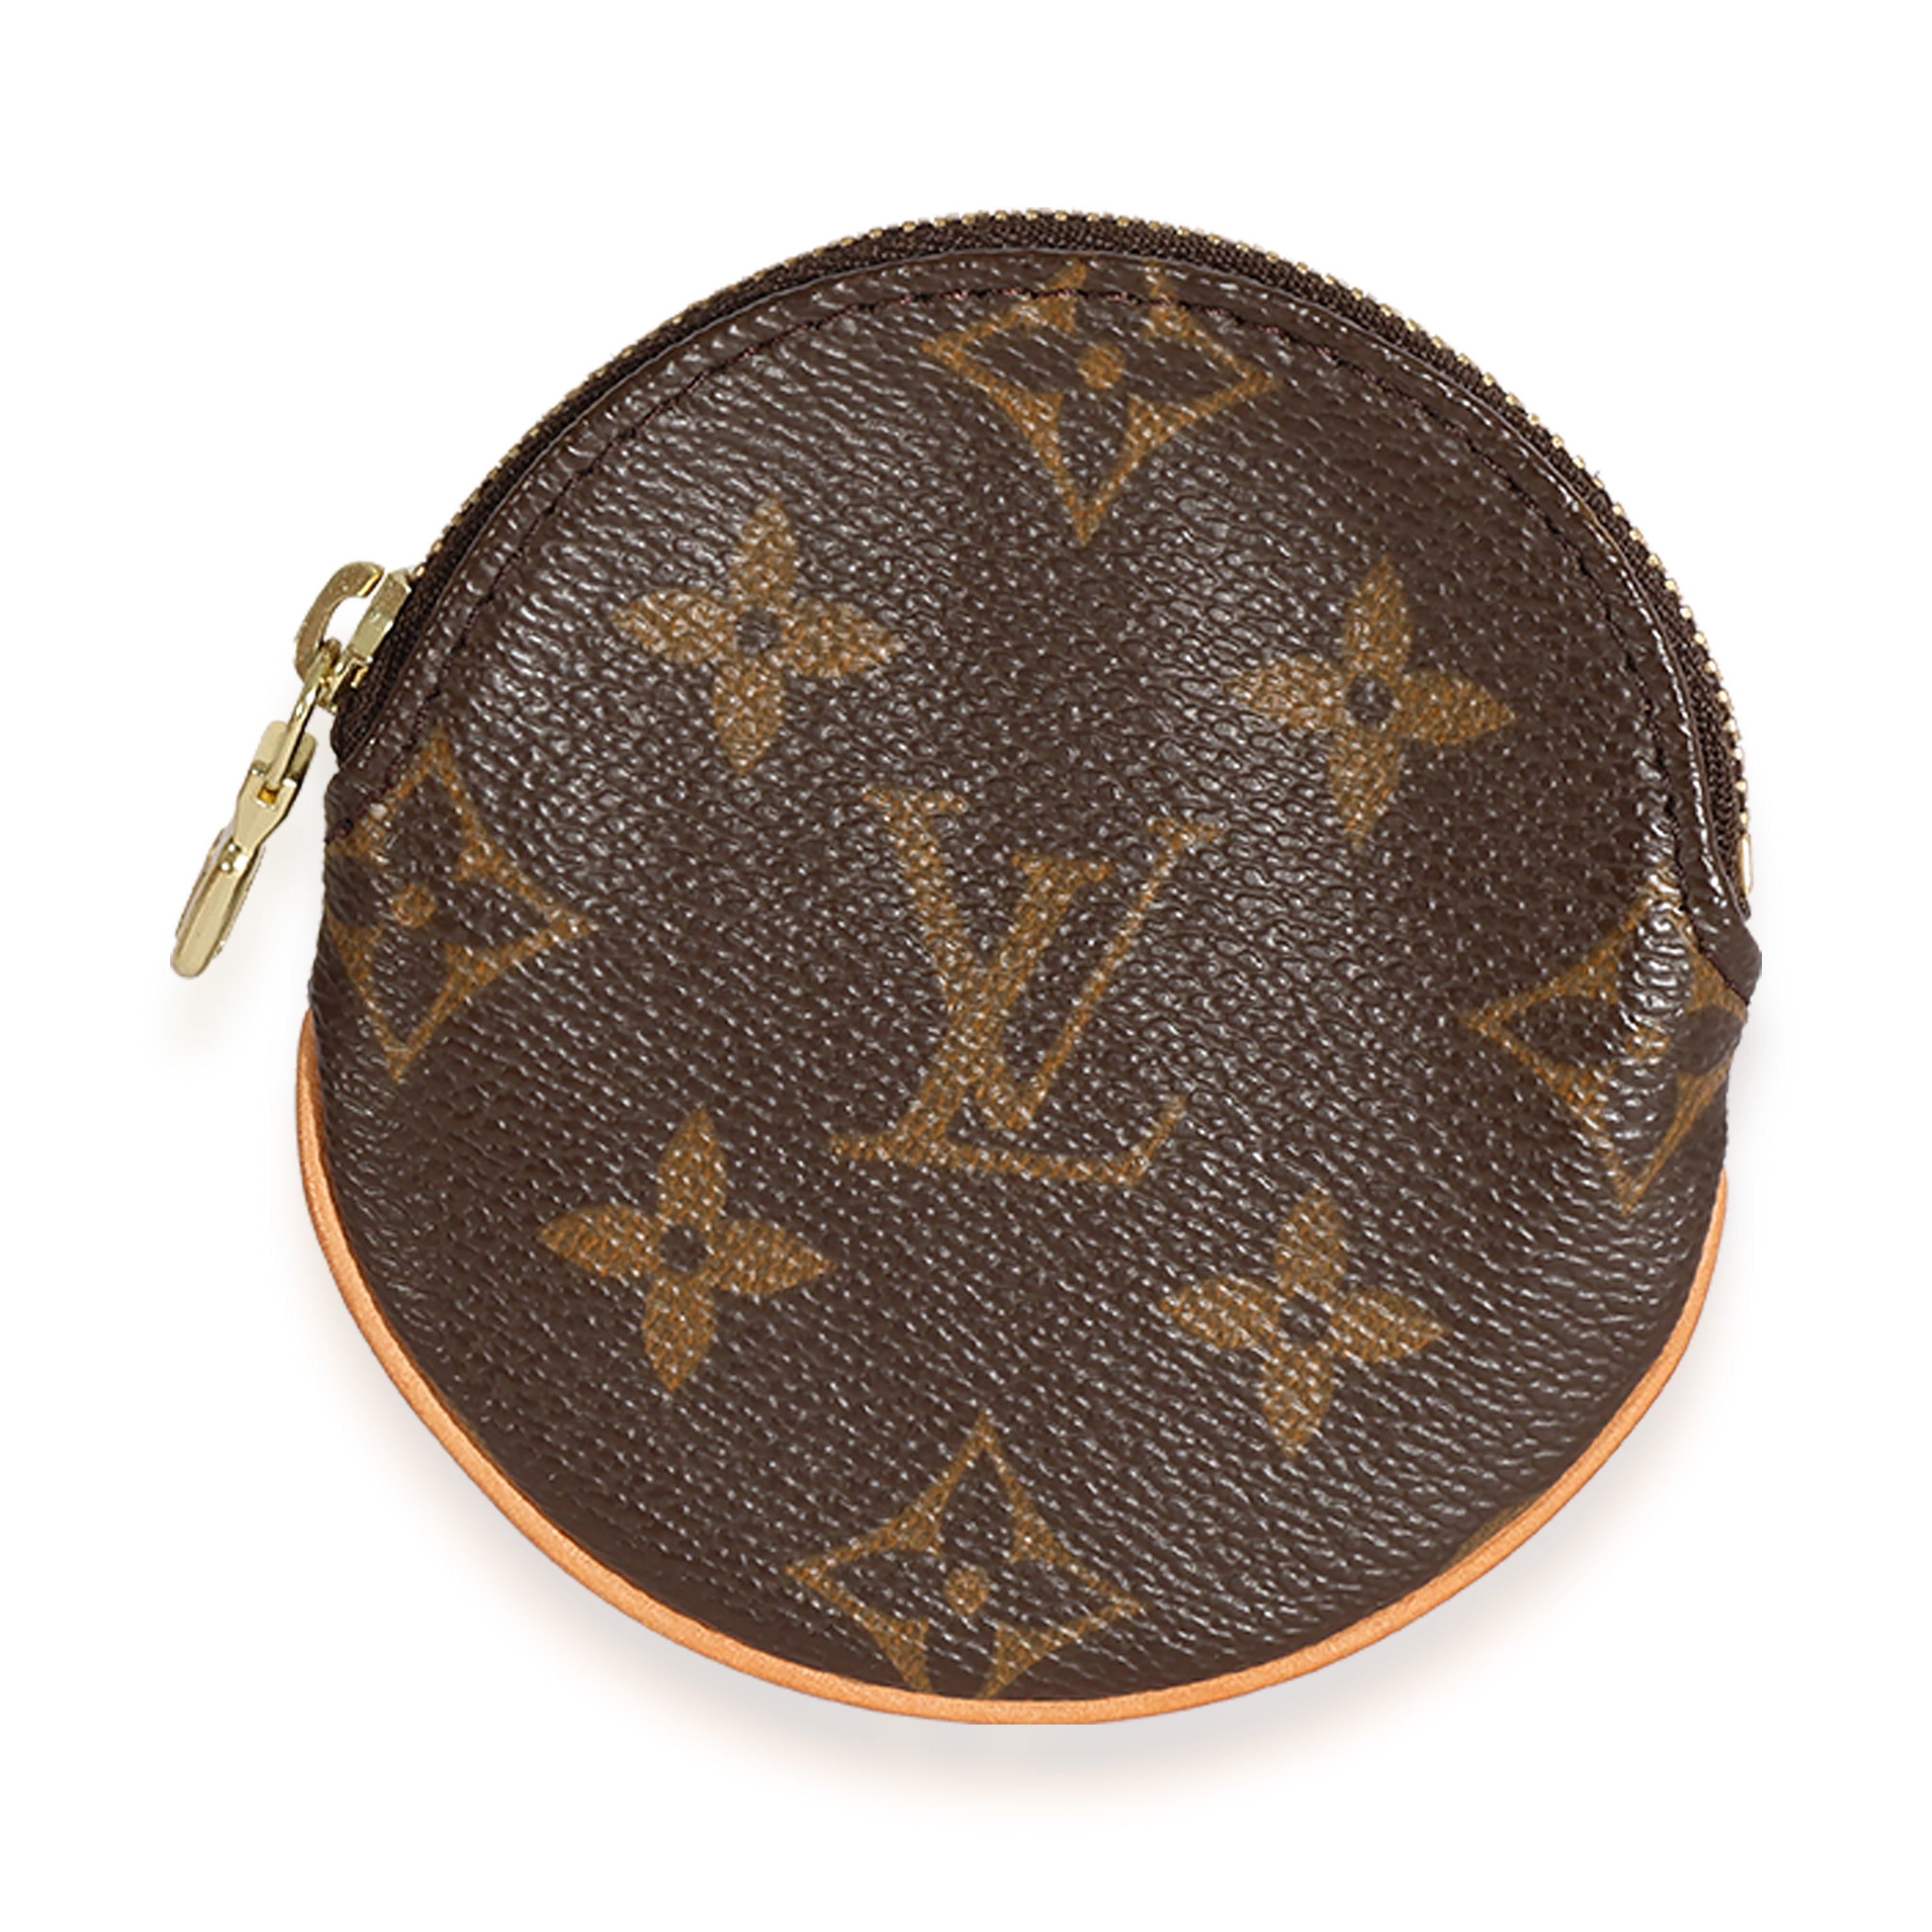 Monogram Round Coin Purse in Raffia Crochet and Smooth Leather – COSETTE